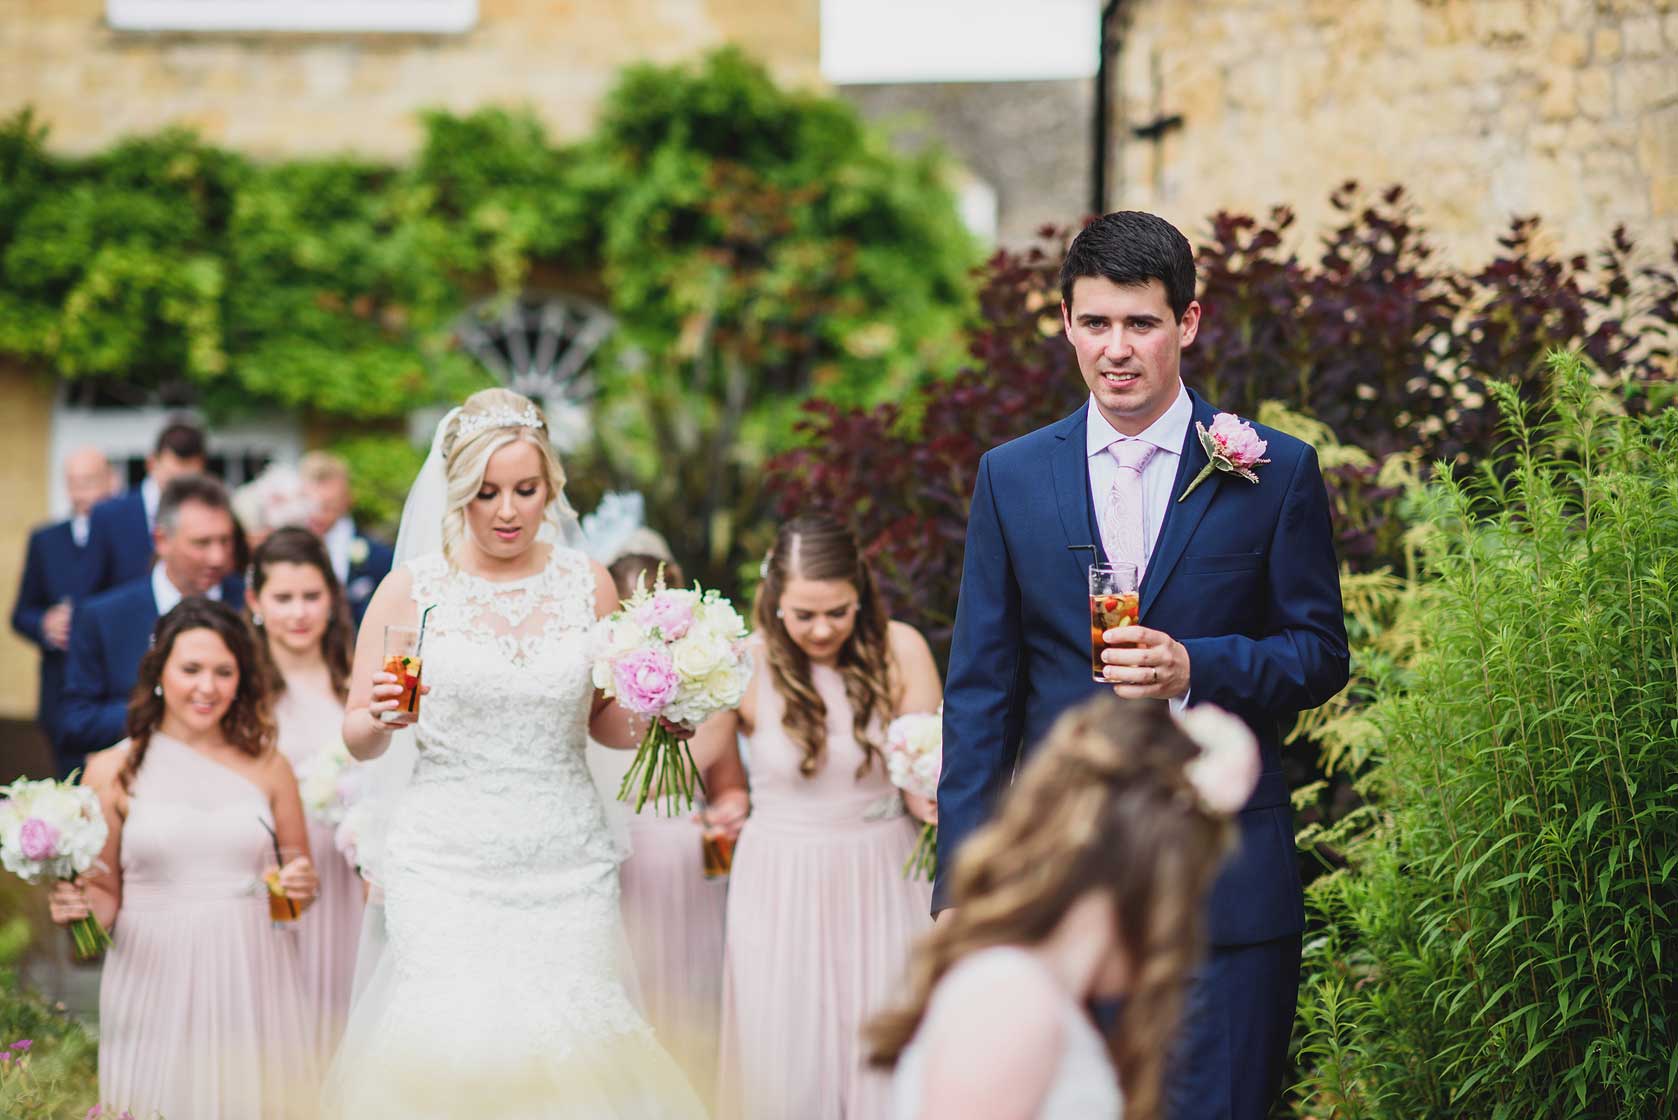 Reportage Wedding Photography at Cotswold House Hotel